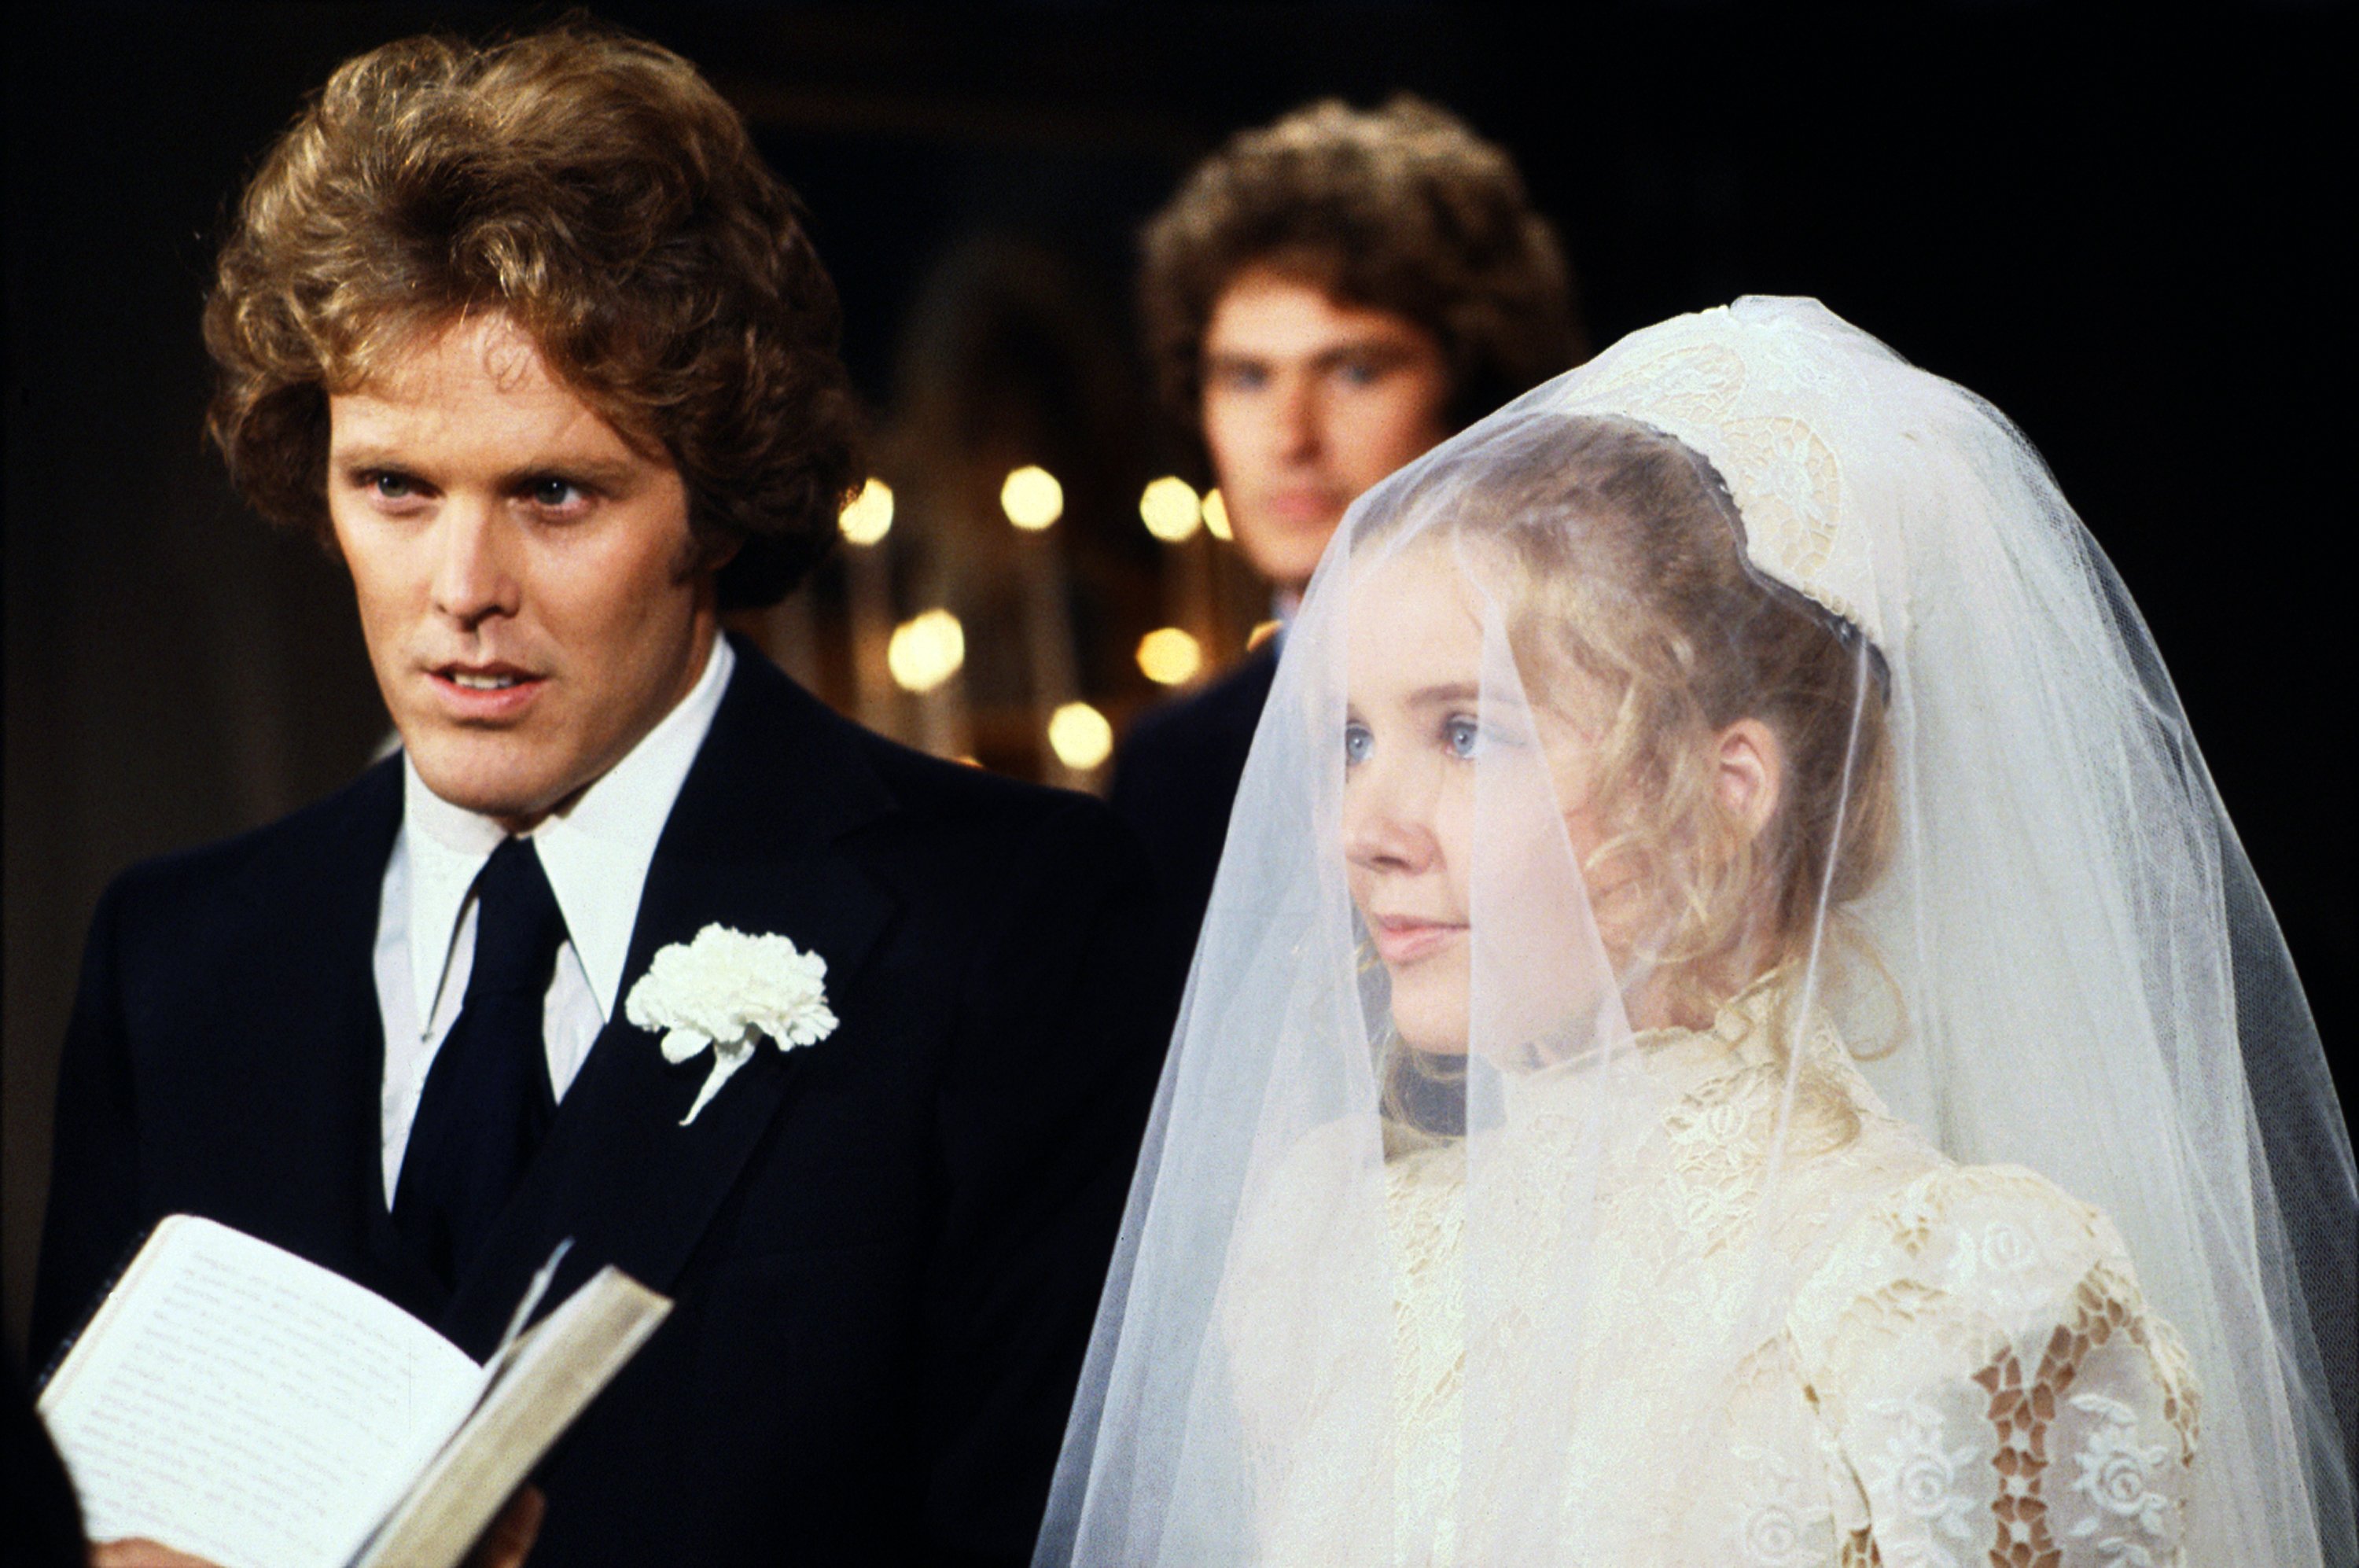 Wings Hauser as Greg Foster and Melody Thomas Scott as Nikki Reed on "The Young and the Restless." 1979.  | Source: Getty Images